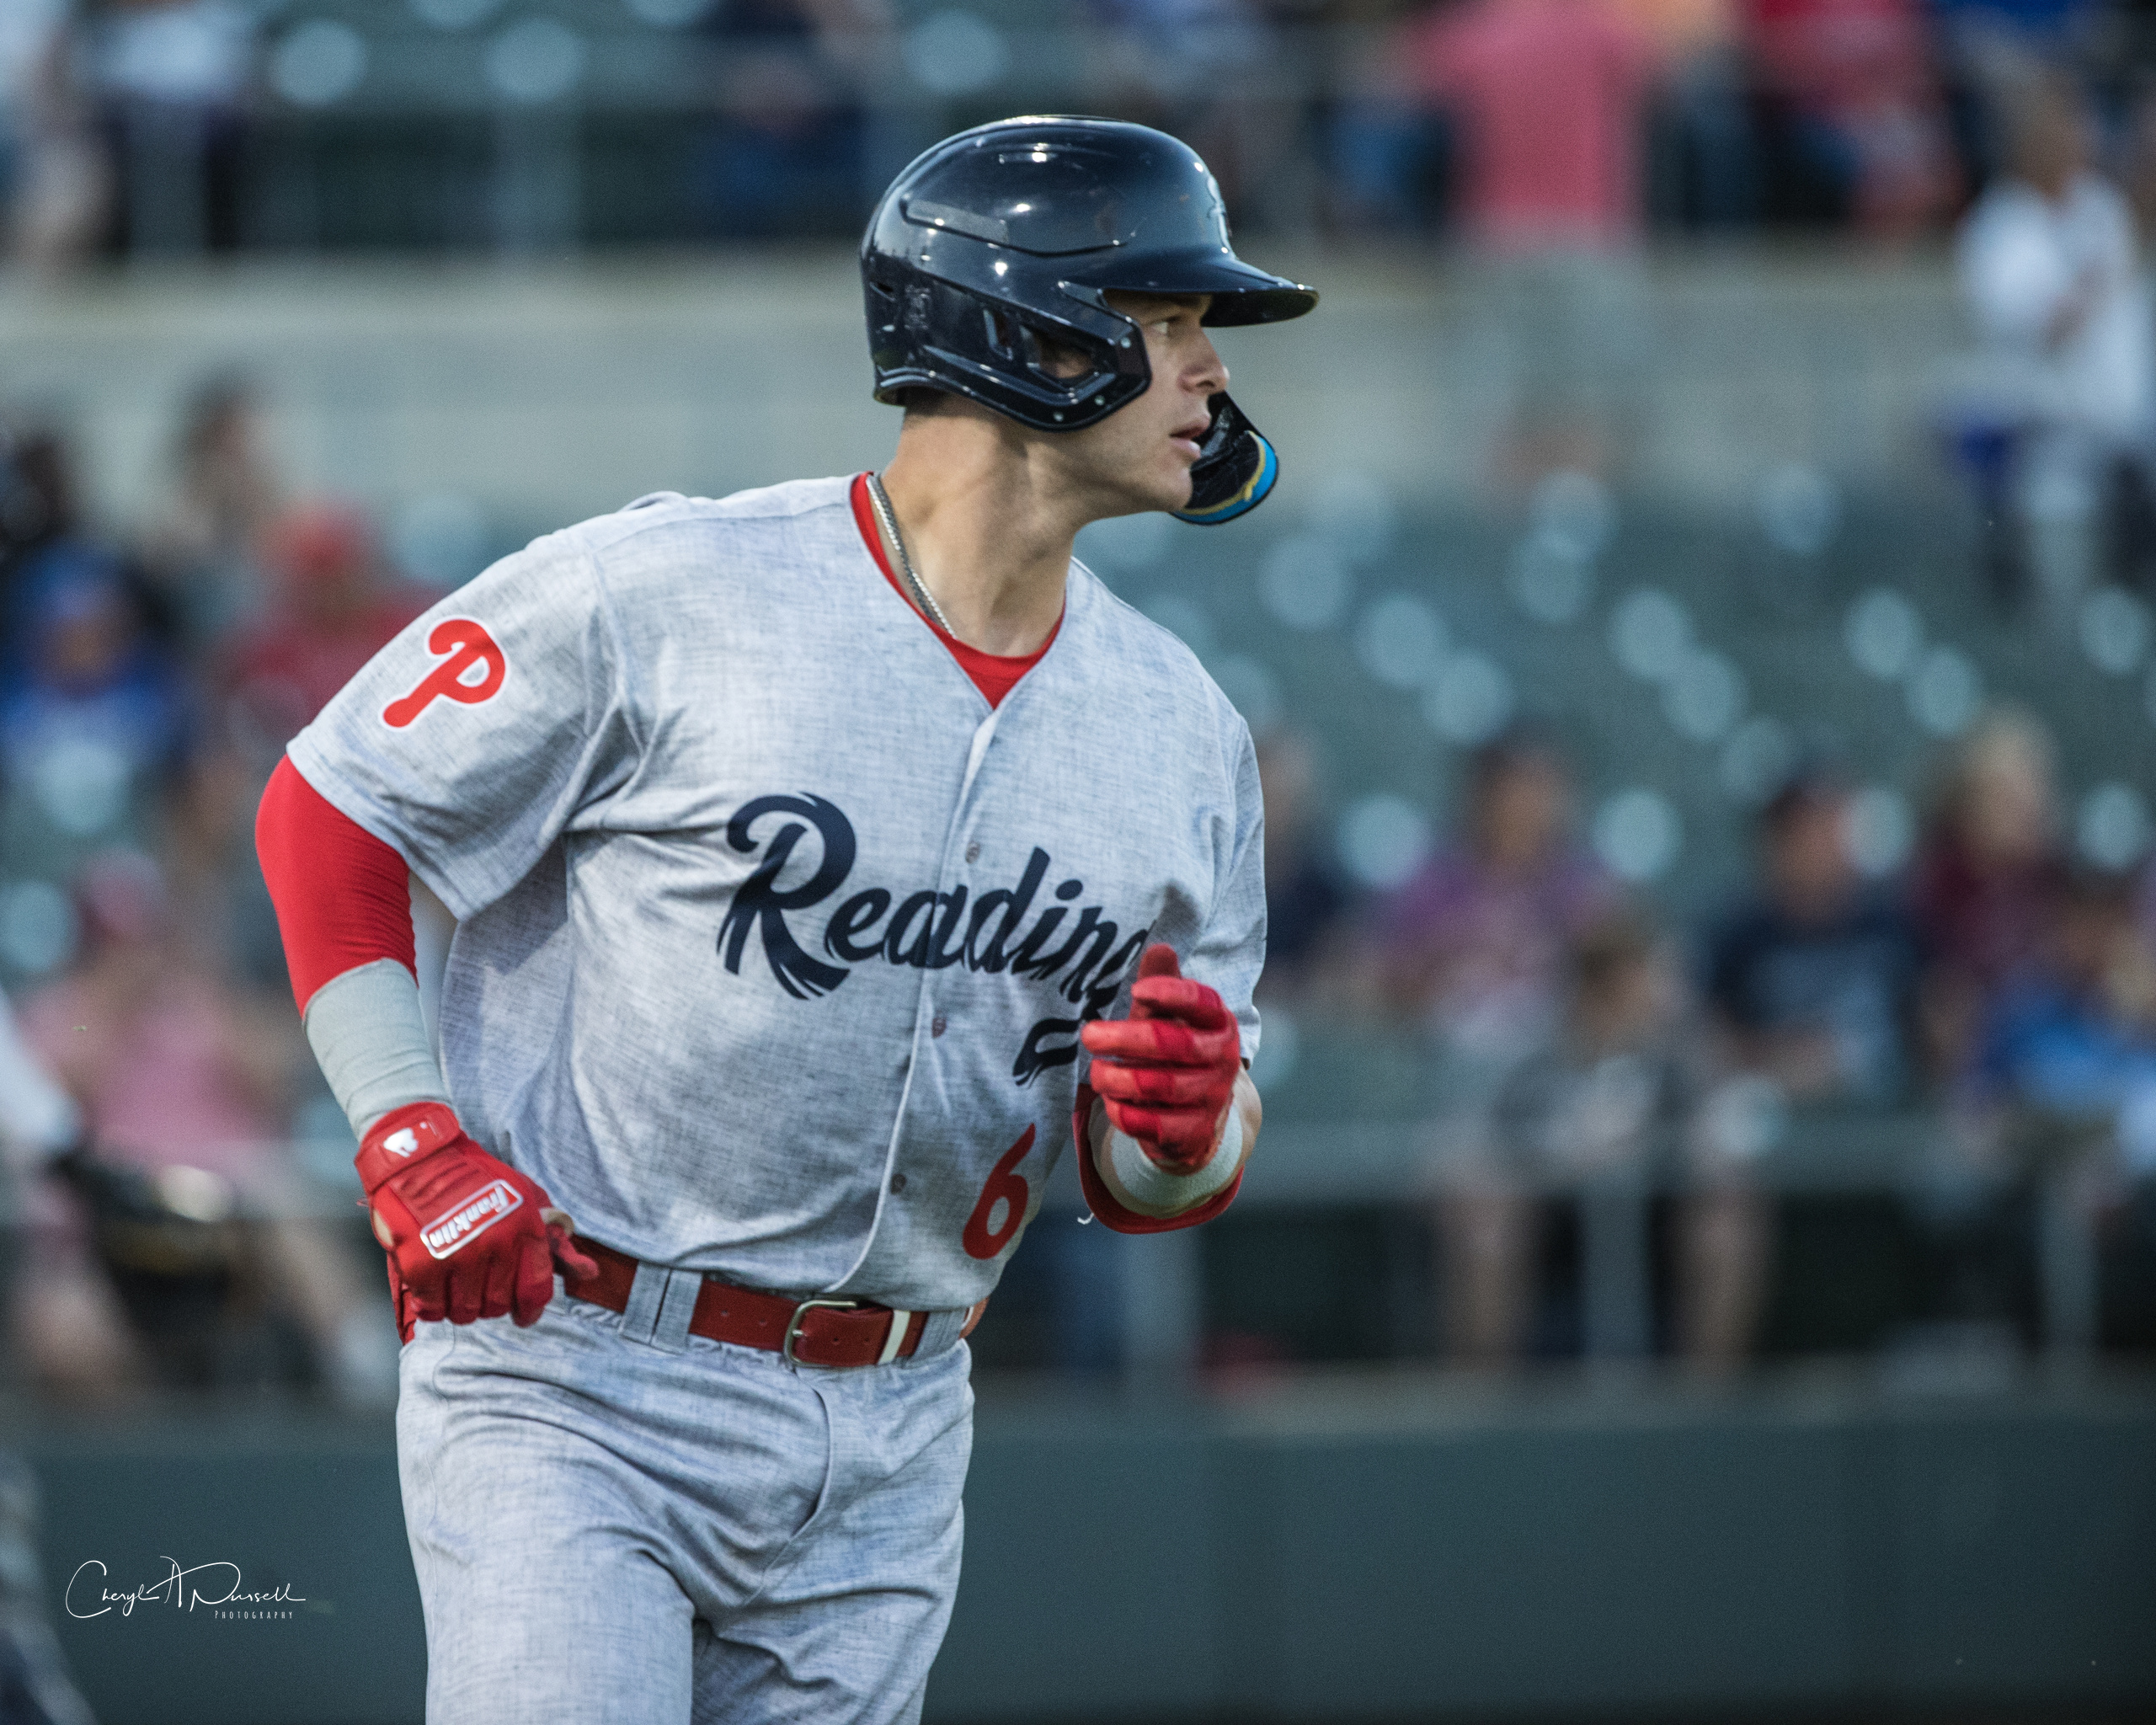 Former Phillies top prospect Logan O'Hoppe promoted to majors by Angels   Phillies Nation - Your source for Philadelphia Phillies news, opinion,  history, rumors, events, and other fun stuff.